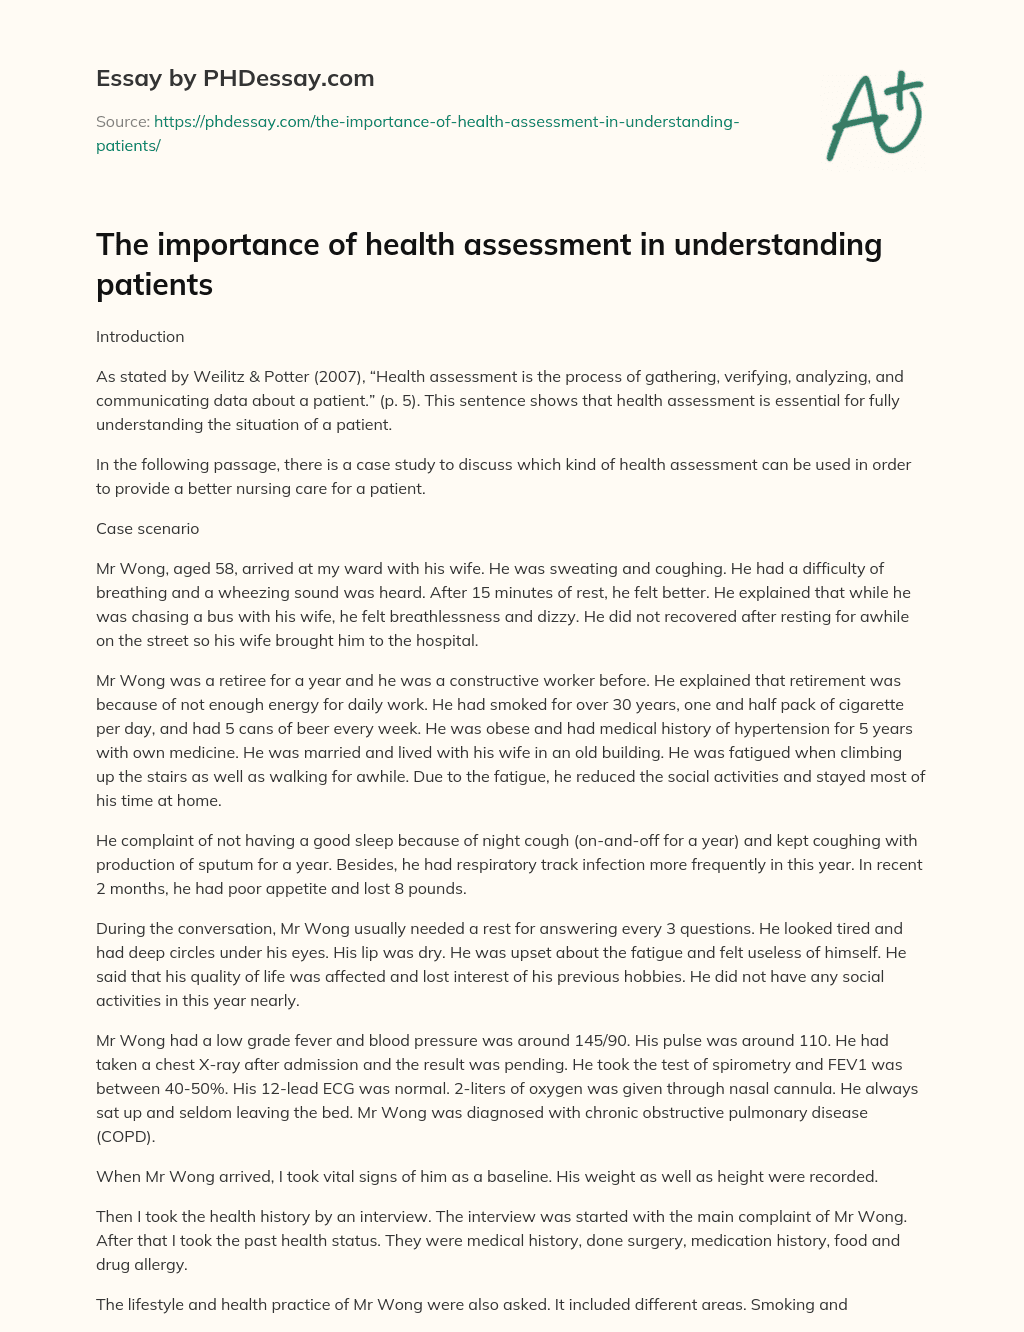 The importance of health assessment in understanding patients essay